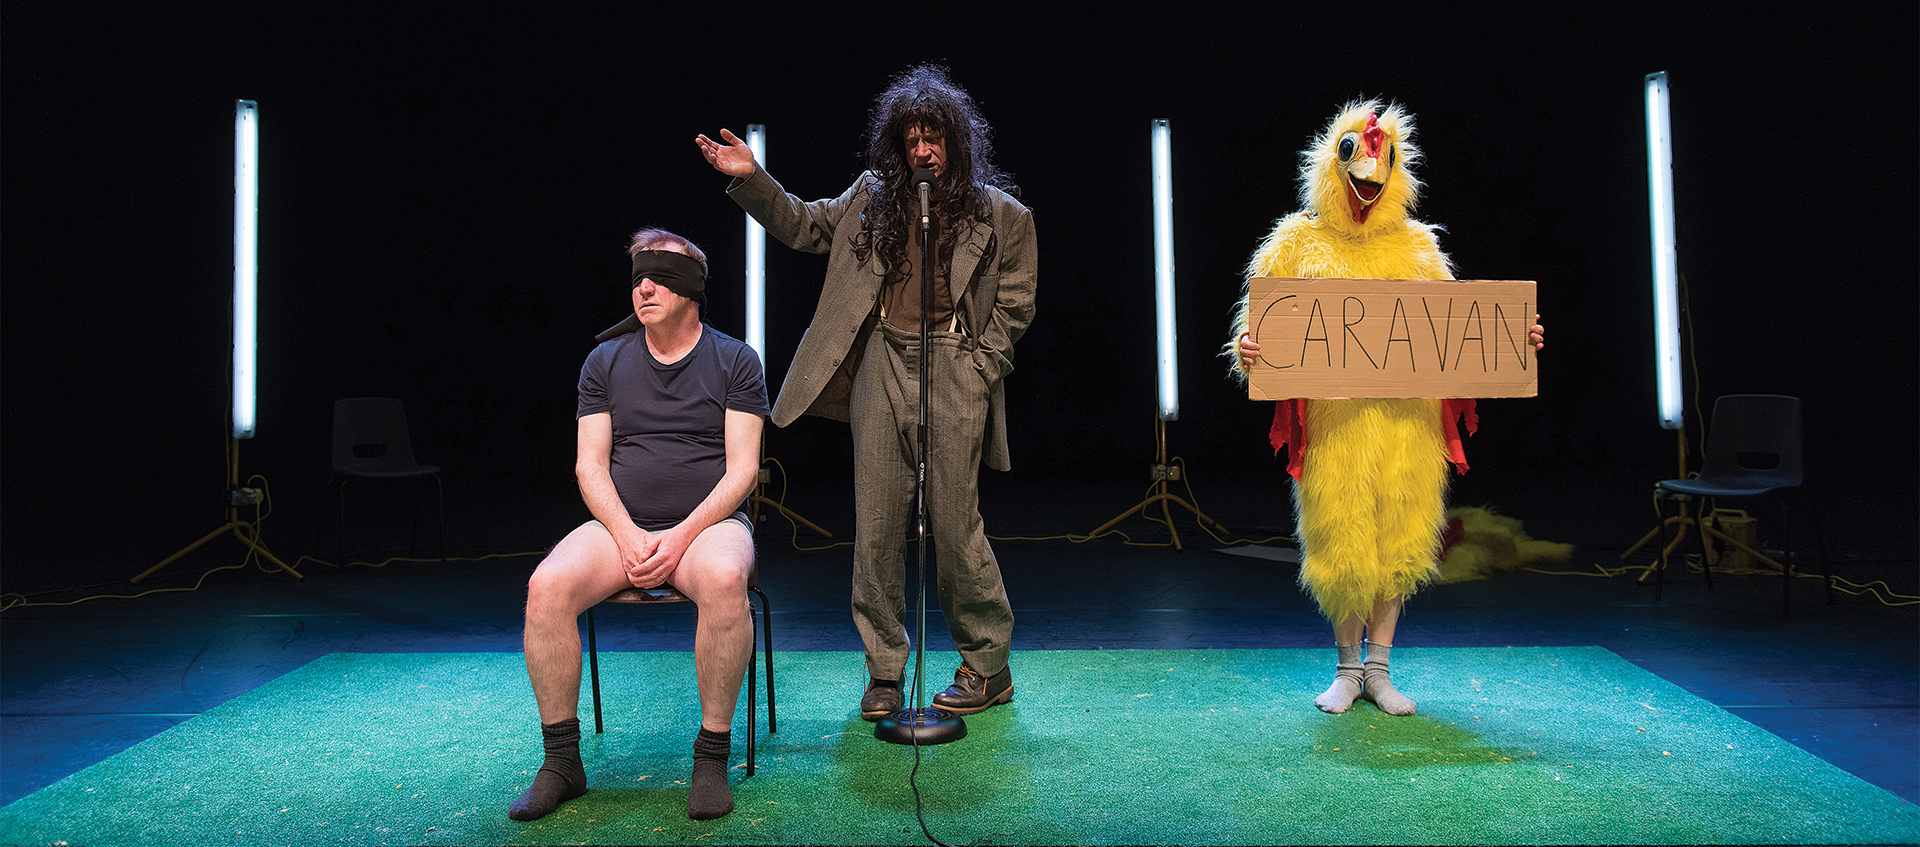 Performers on stage: A blindfolded man listens while another sings next to a performer in a chicken costume holding a sign that reads "caravan"